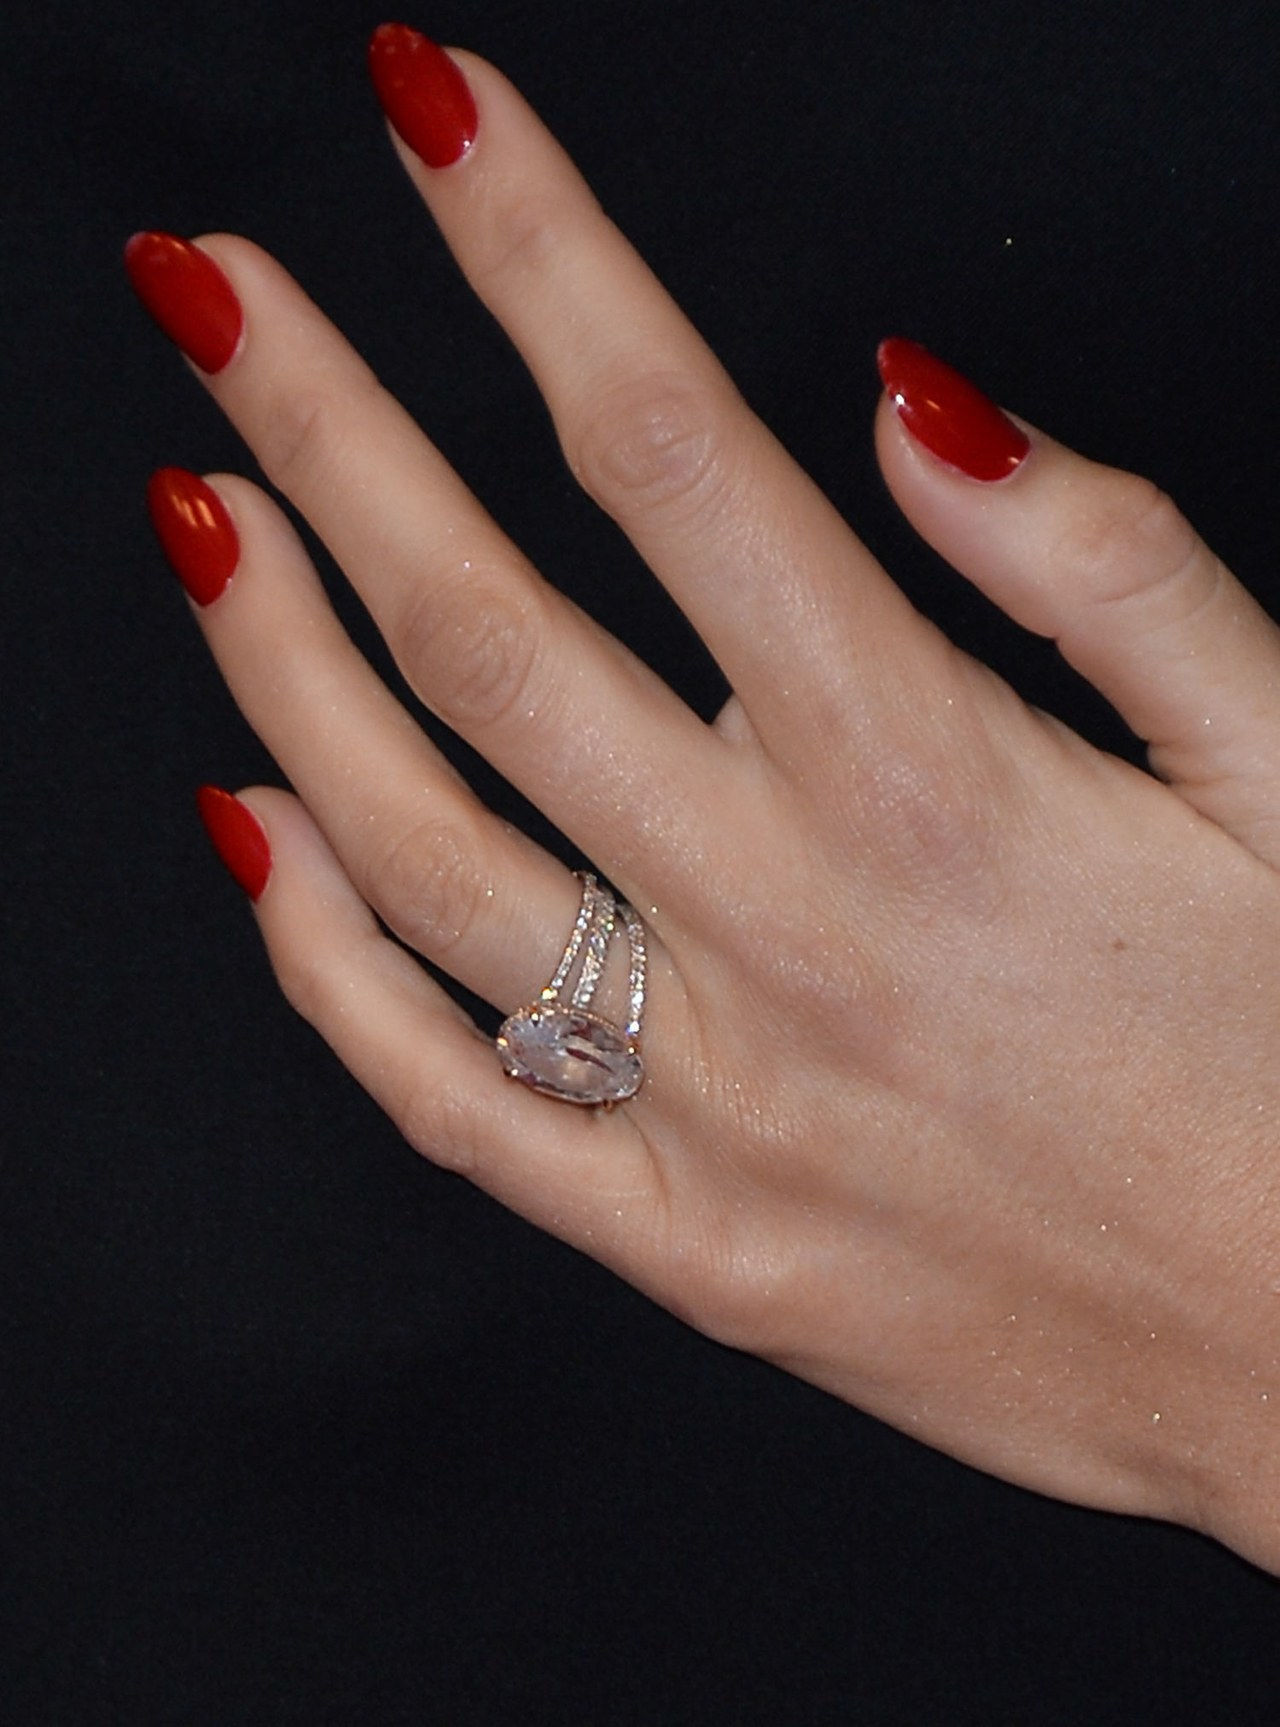 blake lively engagement ring pictures ryan reynolds00515 getty